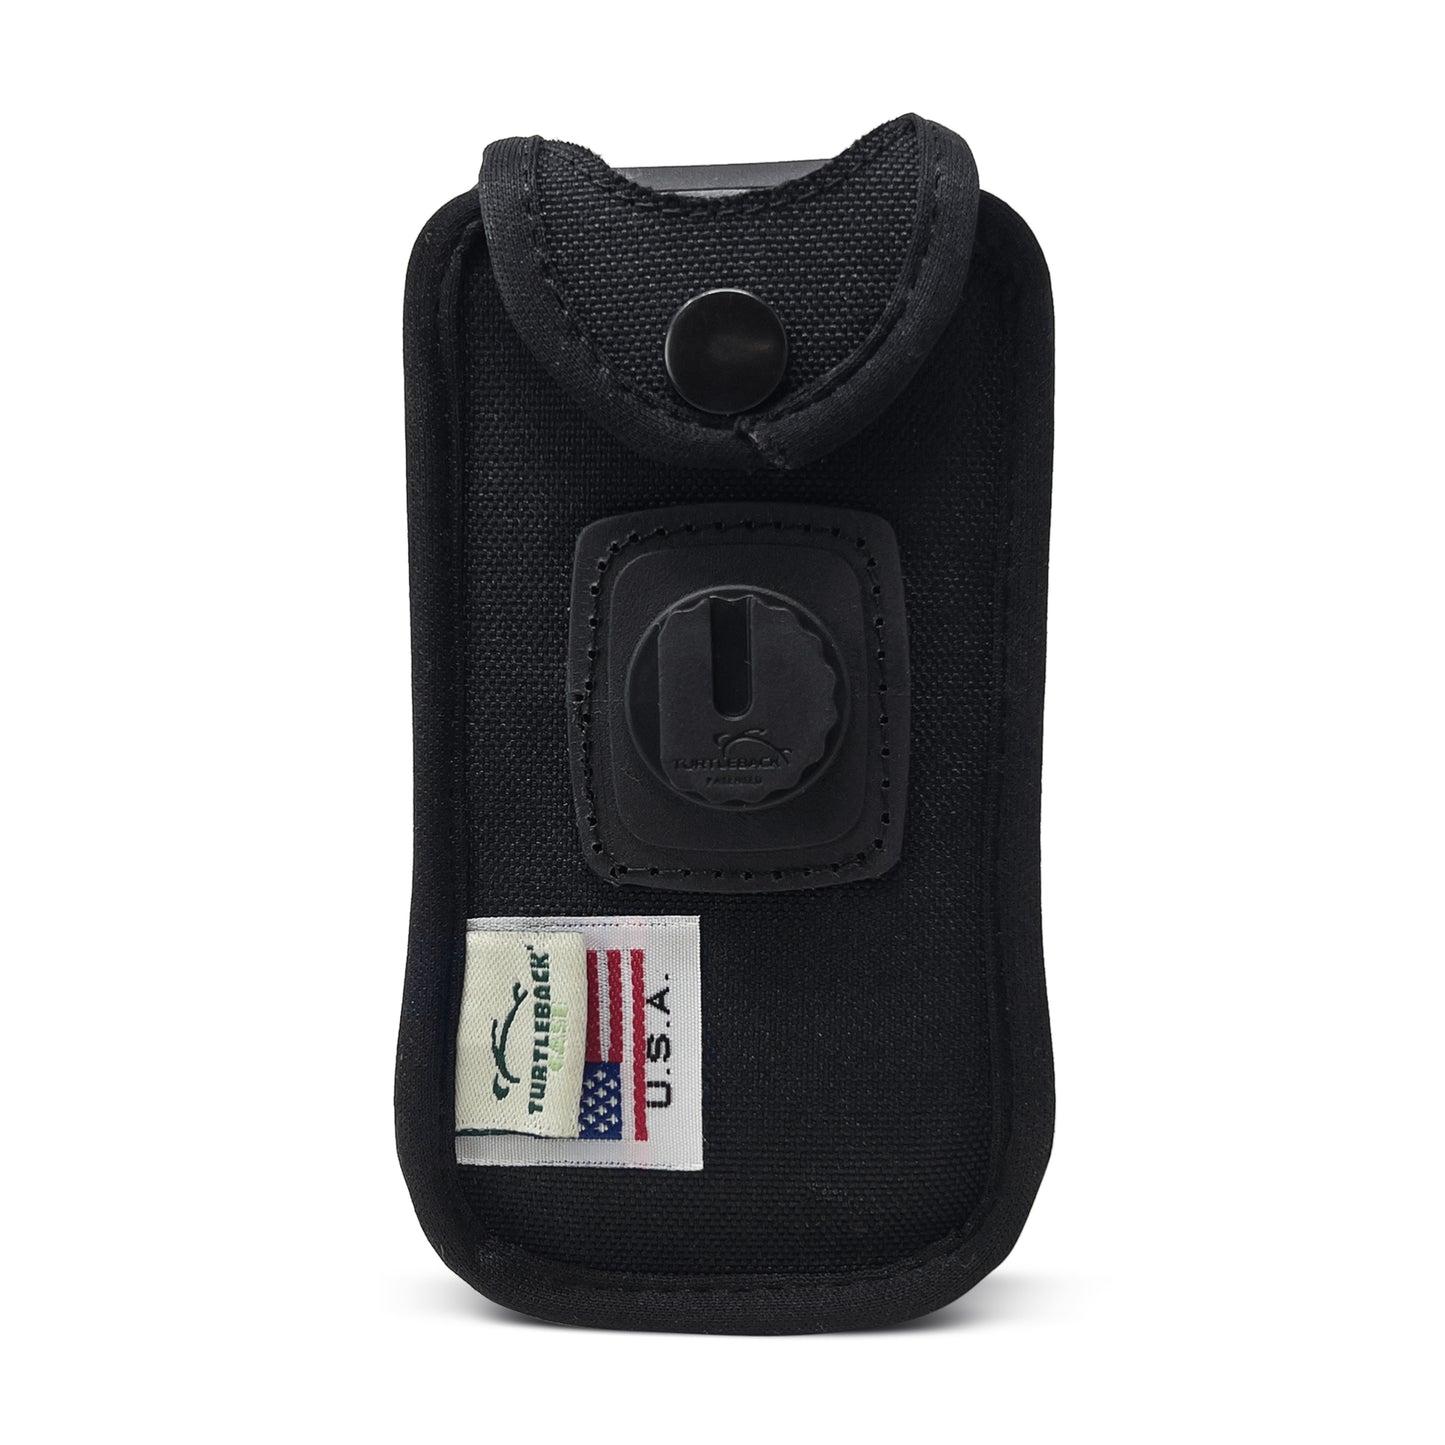 Nylon Fitted Case for Kyocera DuraXV Extreme, XE Epic and XA Equip Features Removable Swivel Unbreakable Belt Clip Made in USA